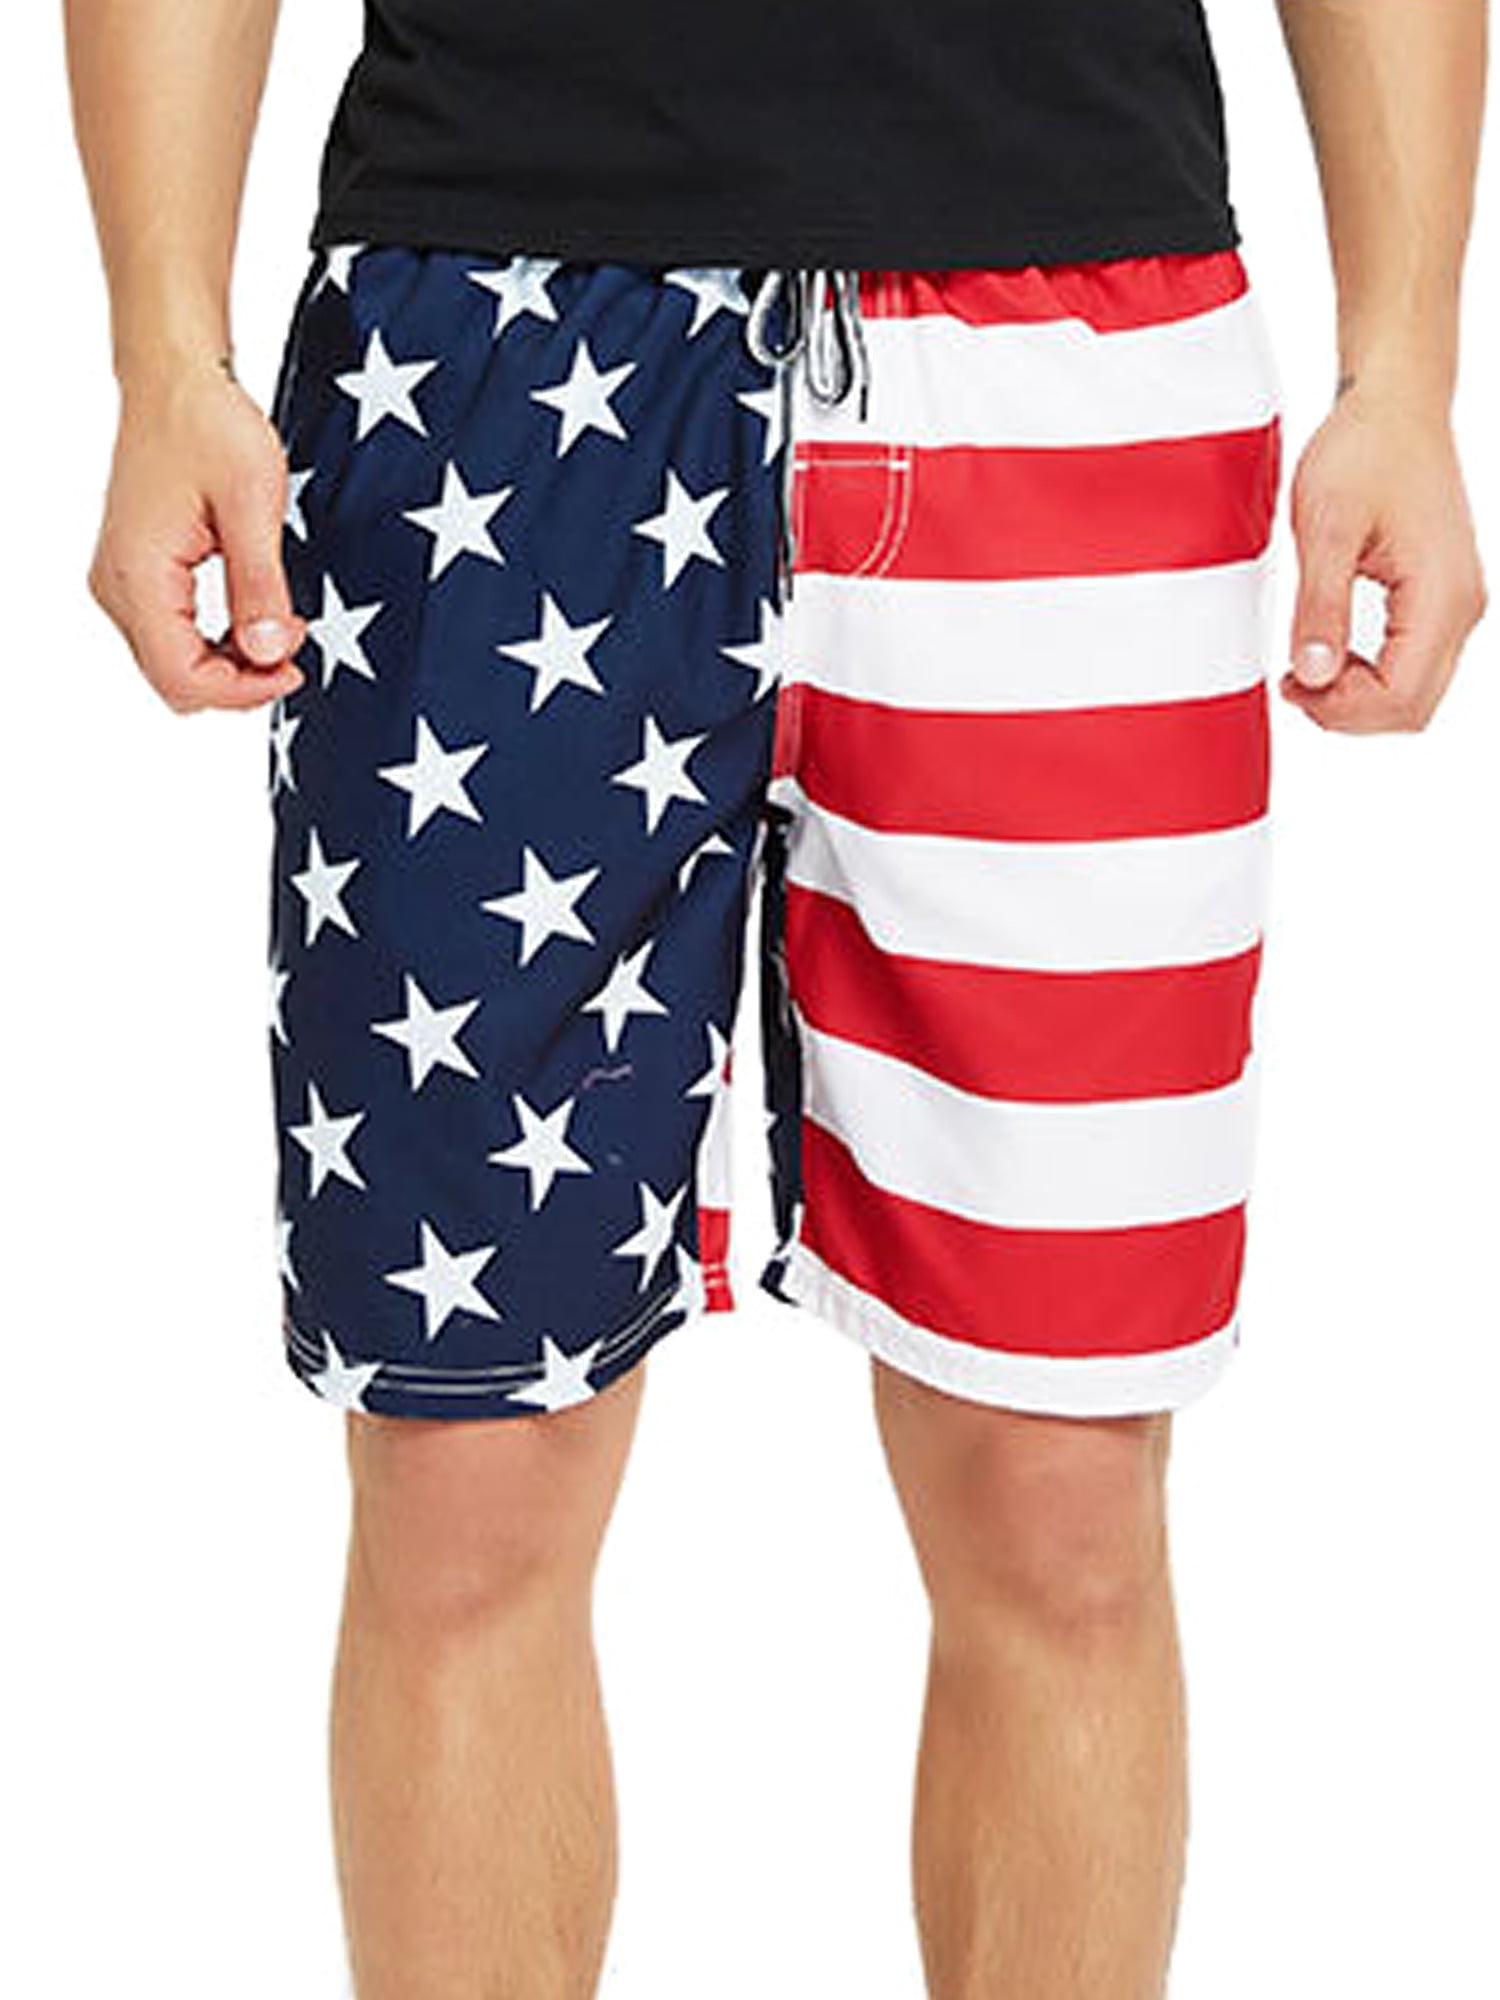 Mens Swim Trunks Eagle with American Flag Quick Dry Drawstring Surfing Beach Board Shorts with Pockets